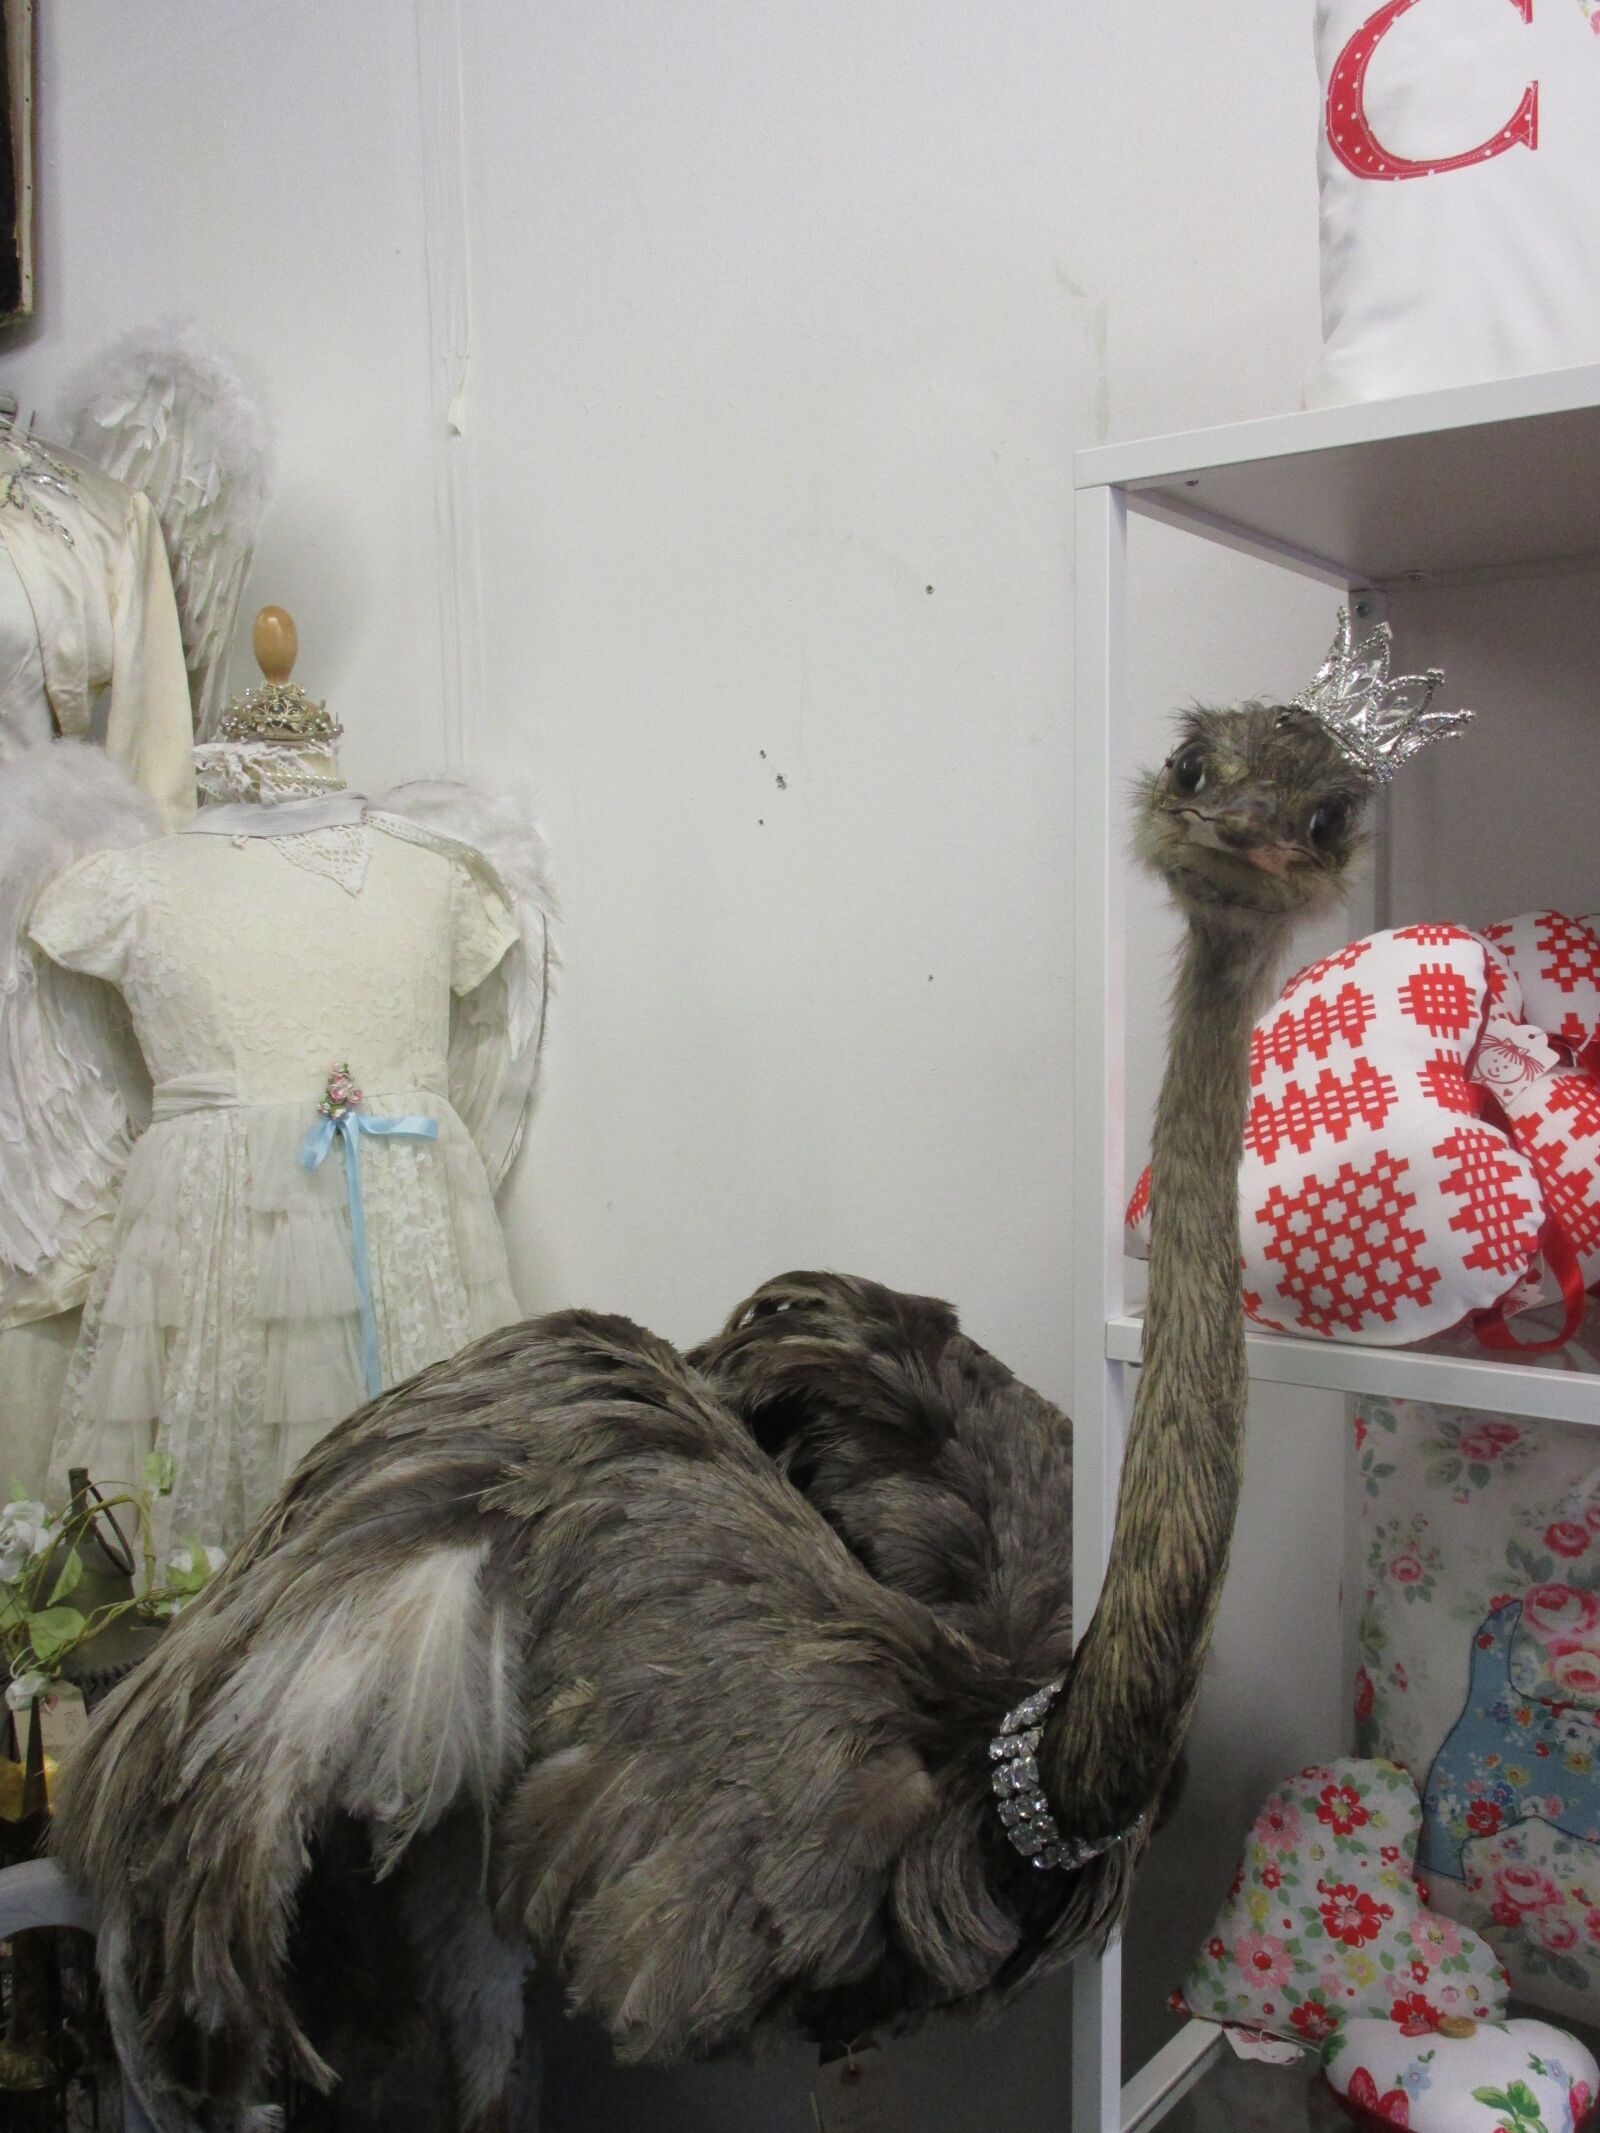 Canon PowerShot ELPH 150 IS (IXUS 155 / IXY 140) sample photo. "Weird, ostrich, taxidermy" photography